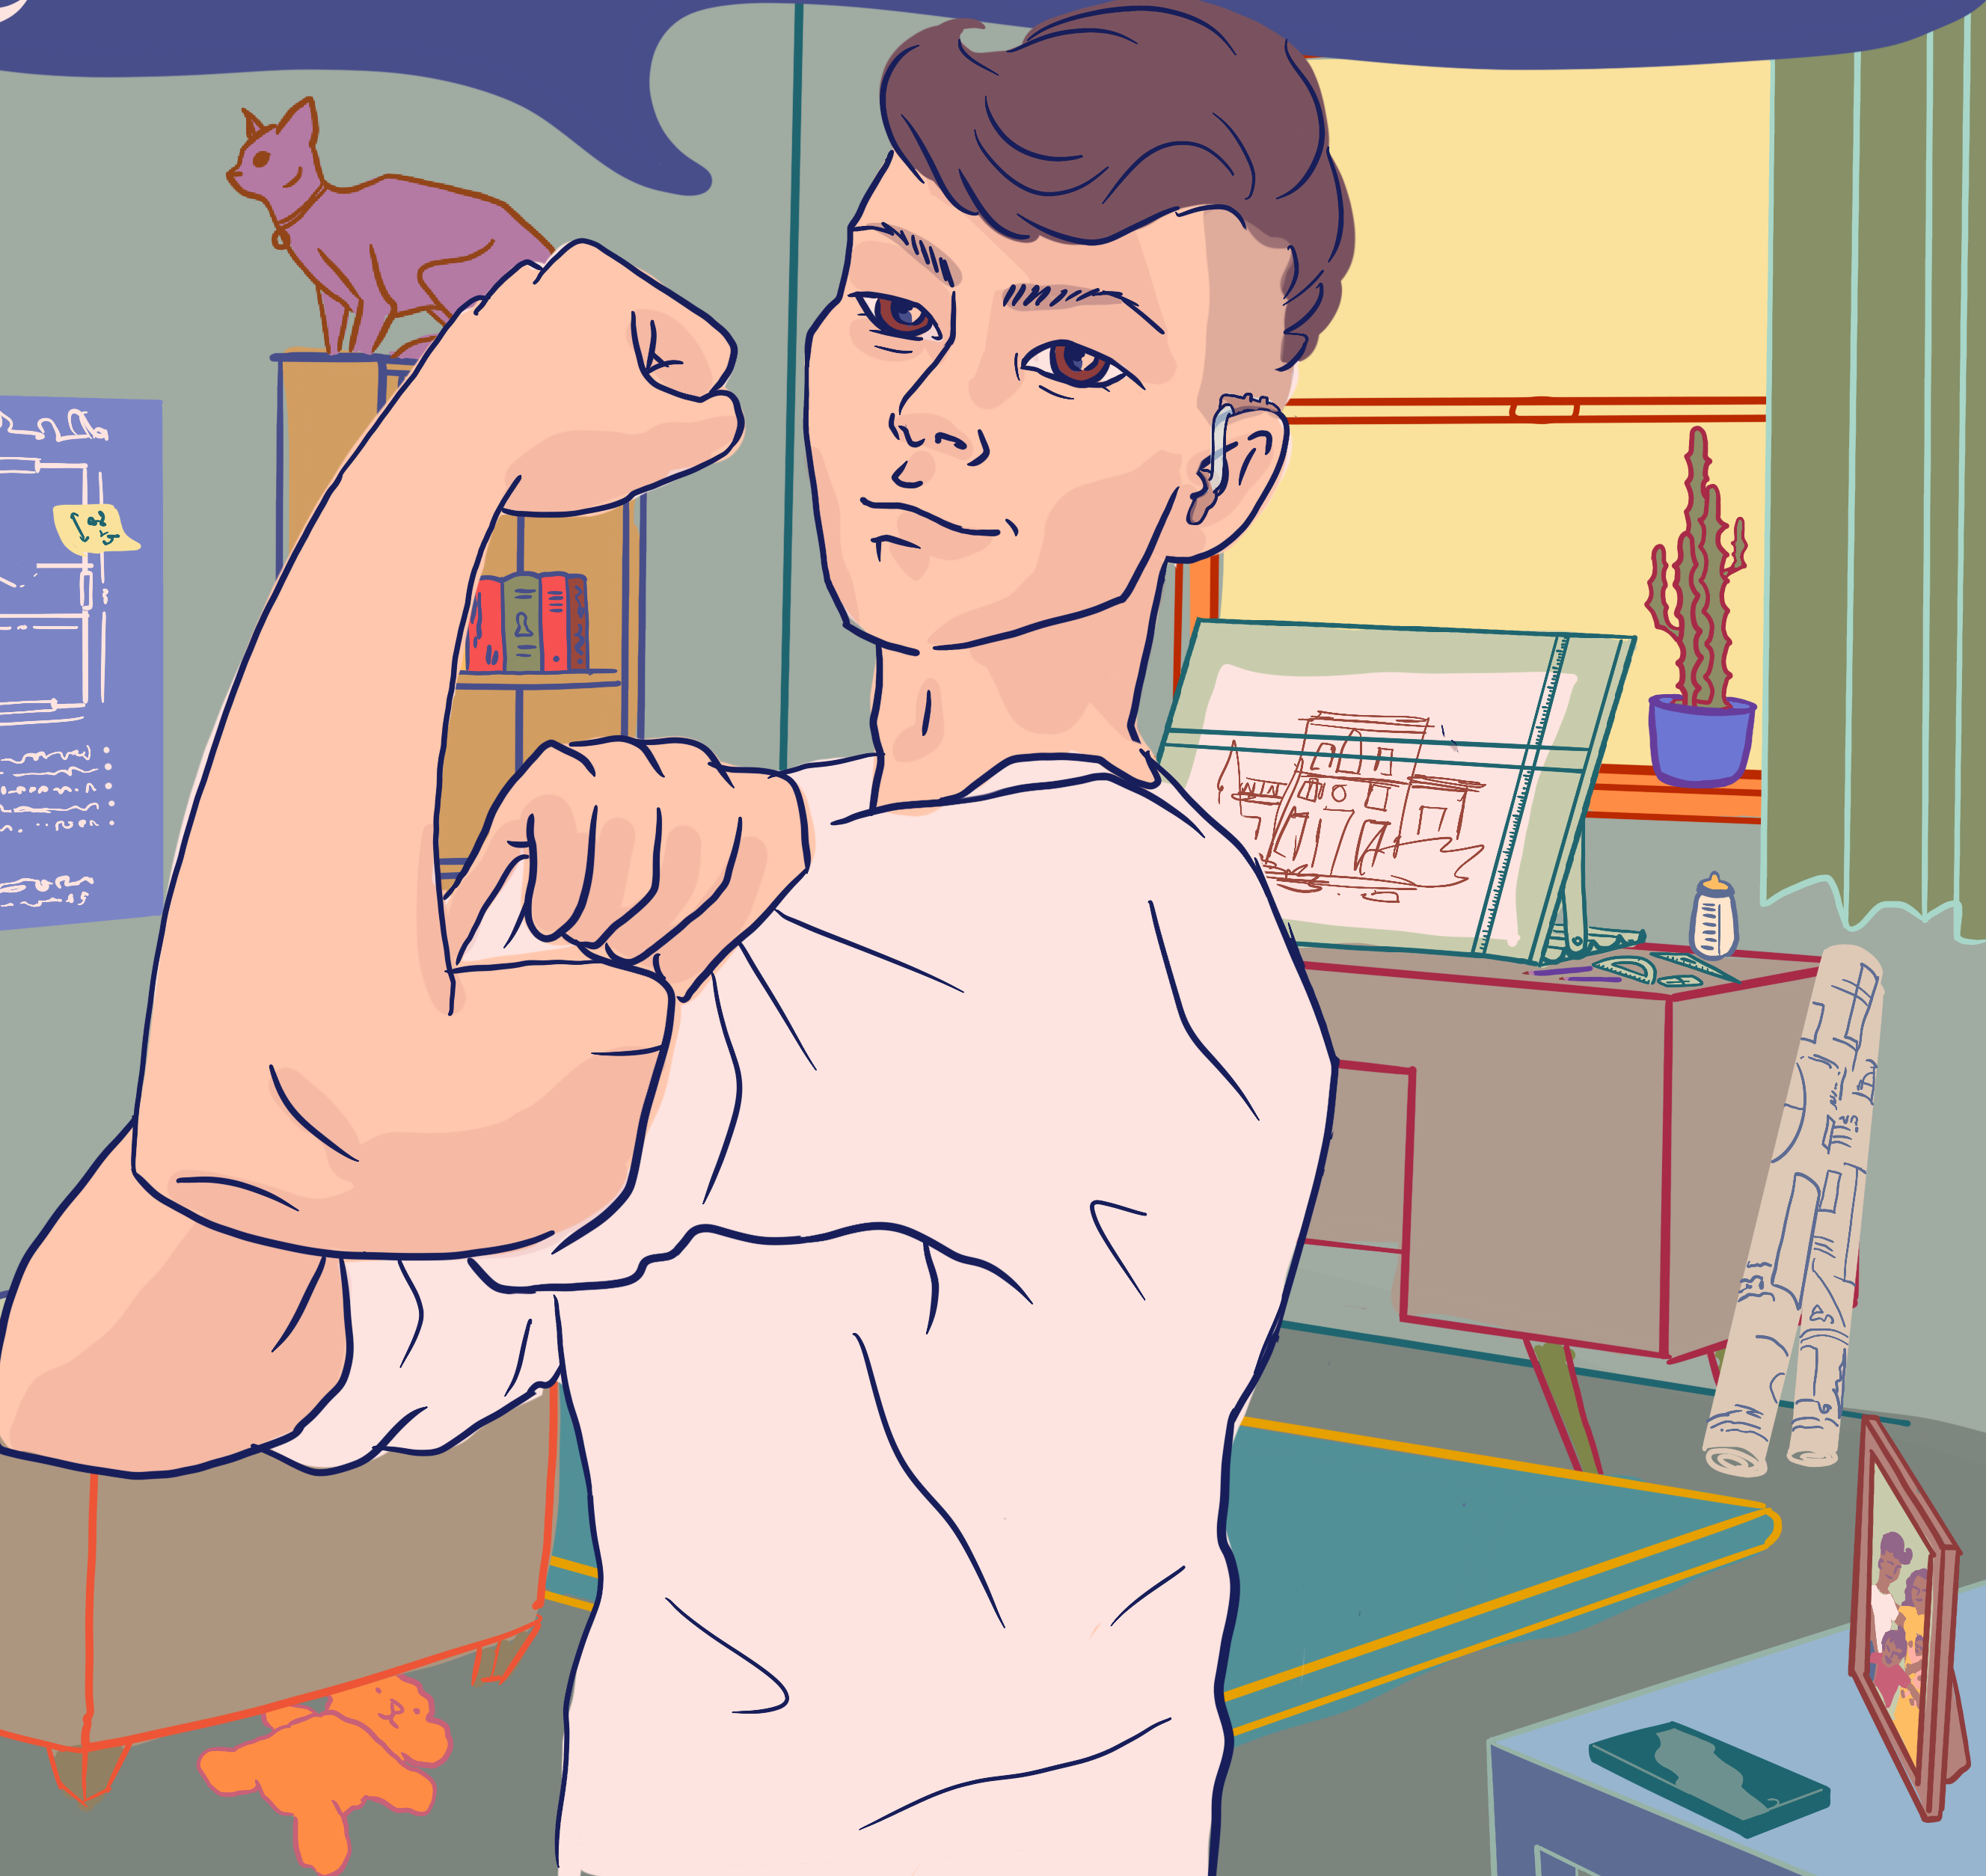 Image description: Illustration of woman with short hair flexing her bicep saying 2We can work remotely!